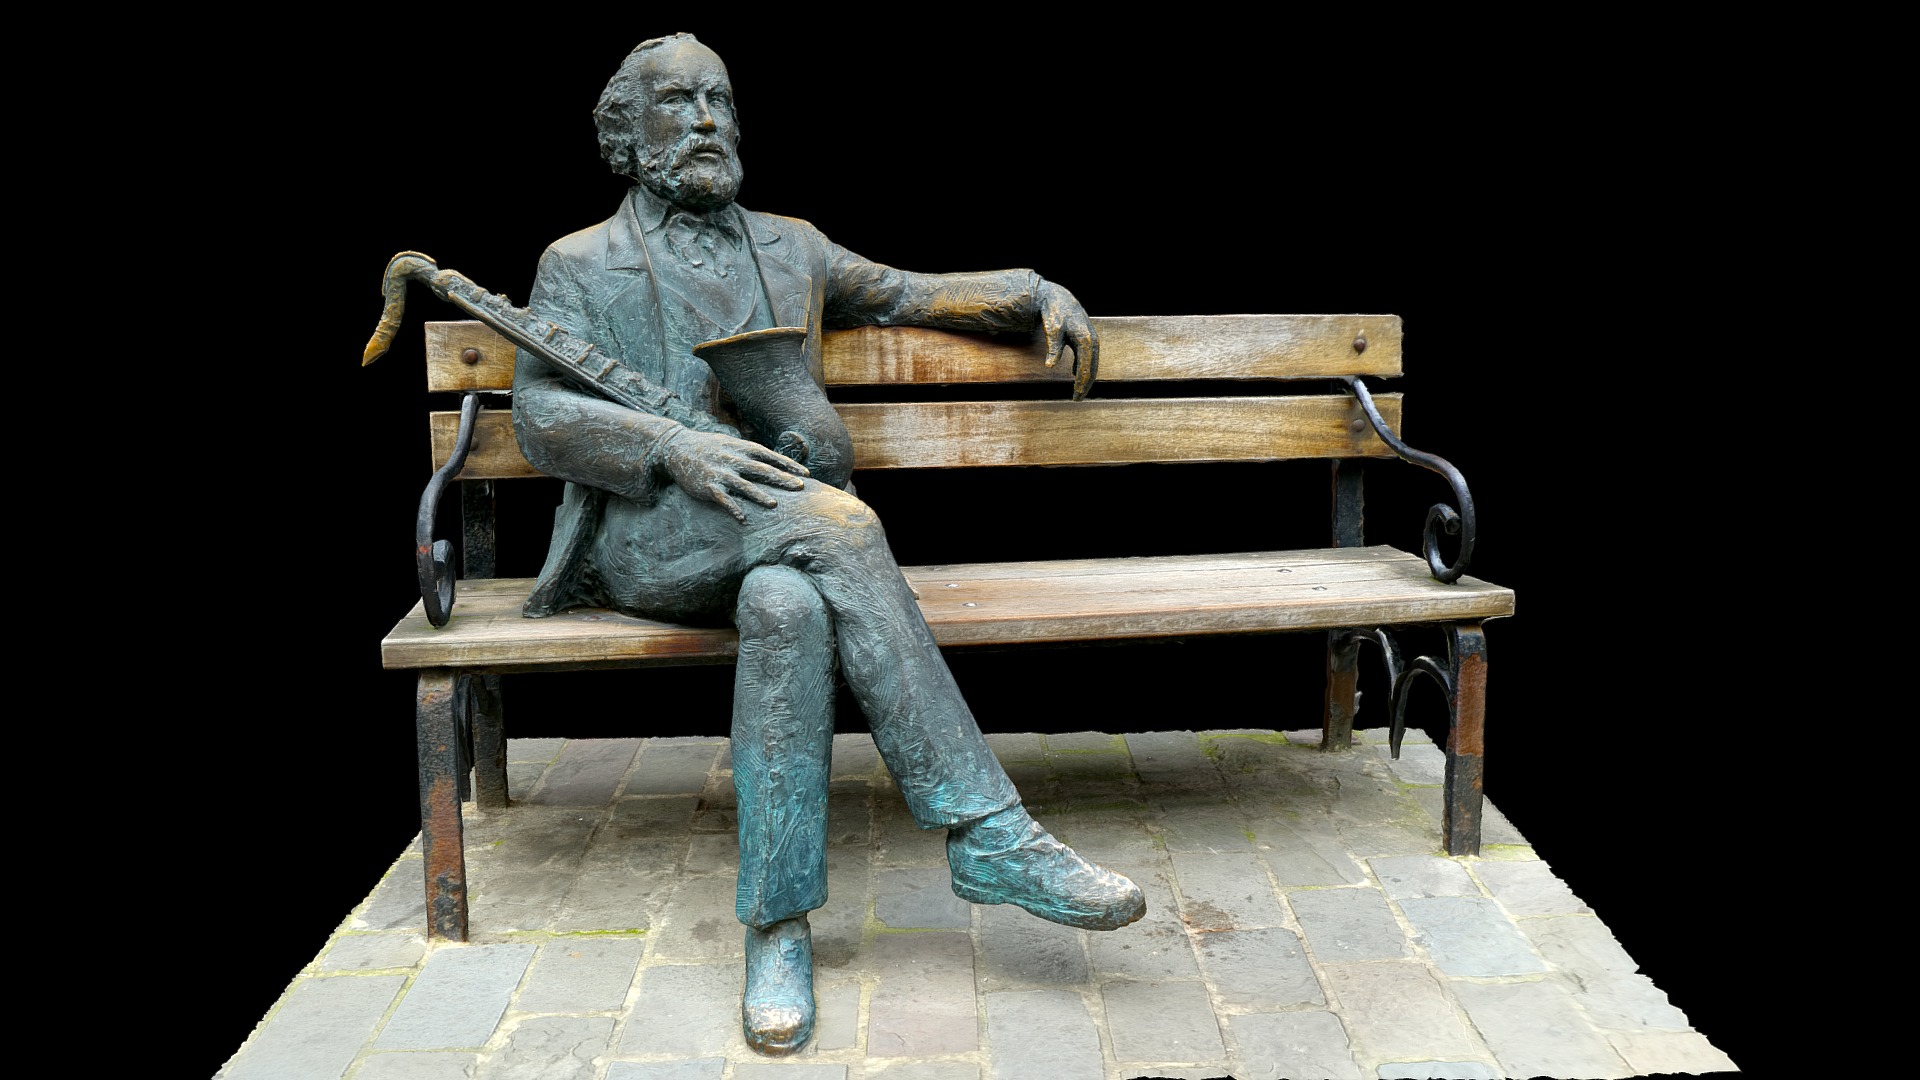 3D model Statue of Adolphe Sax - This is a 3D model of the Statue of Adolphe Sax. The 3D model is about a statue of a person sitting on a bench.